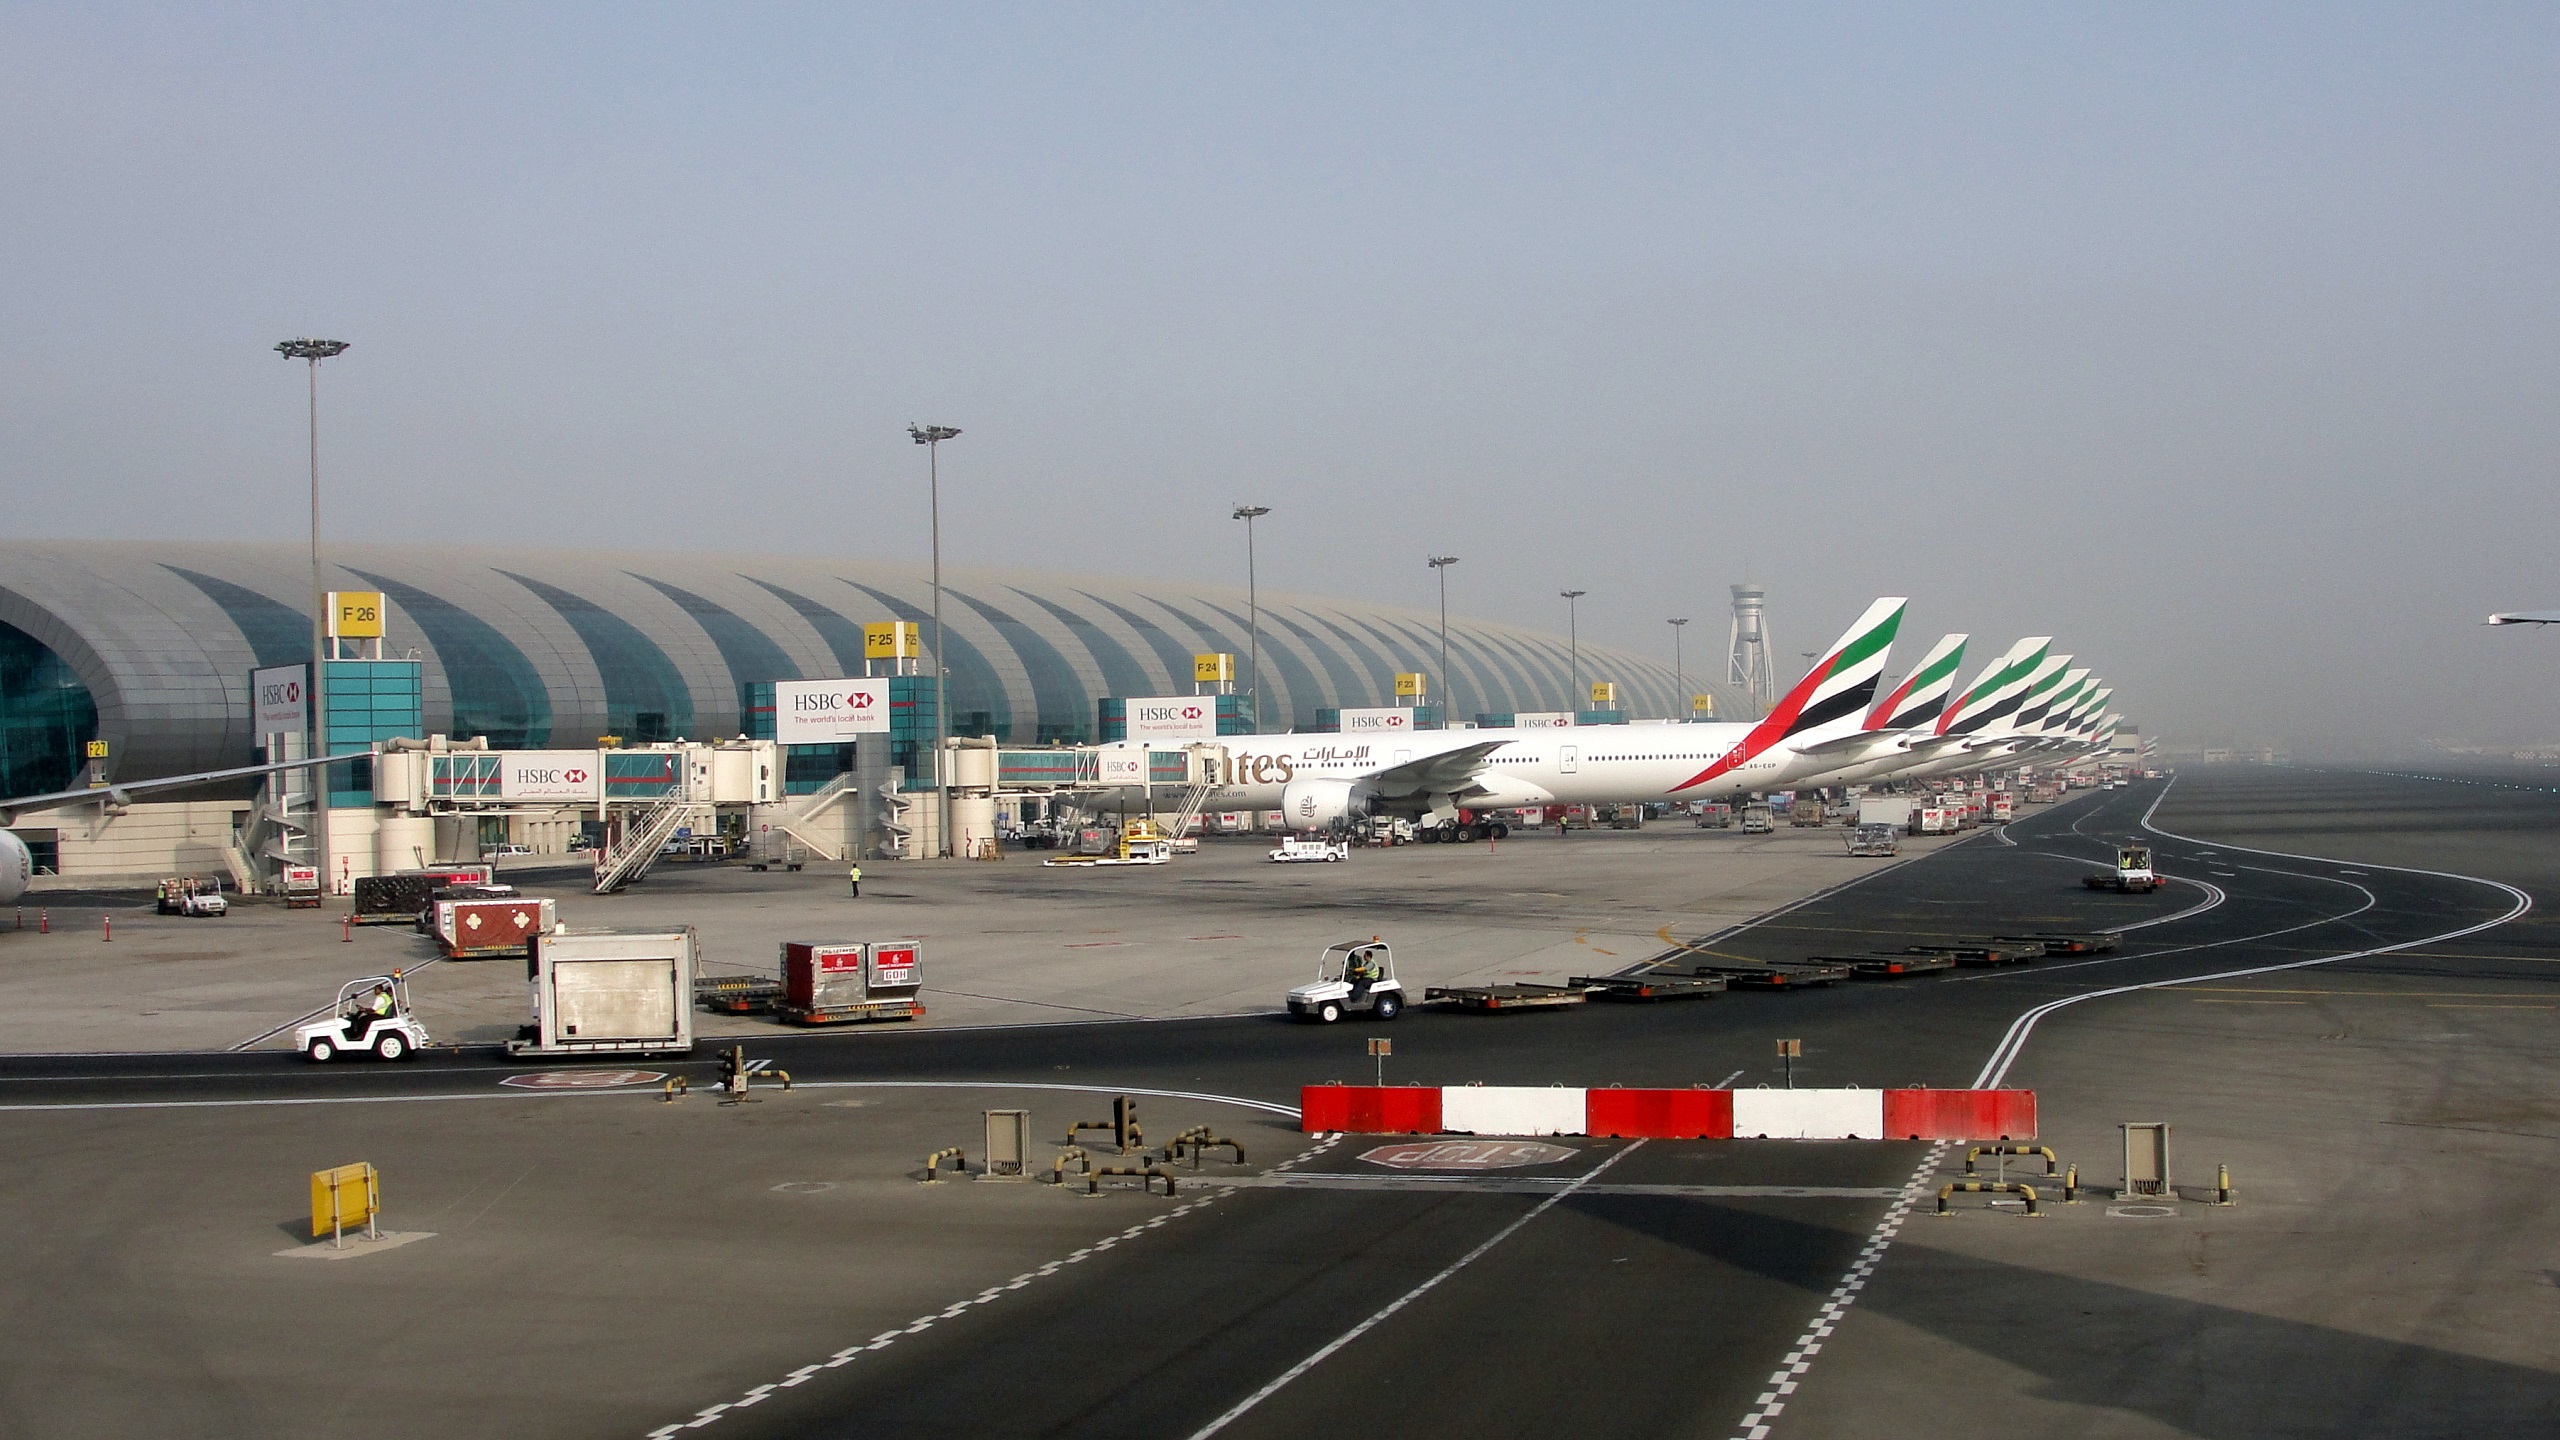 Dubai Airports chooses Aconex to manage projects - Construction Business  News Middle East